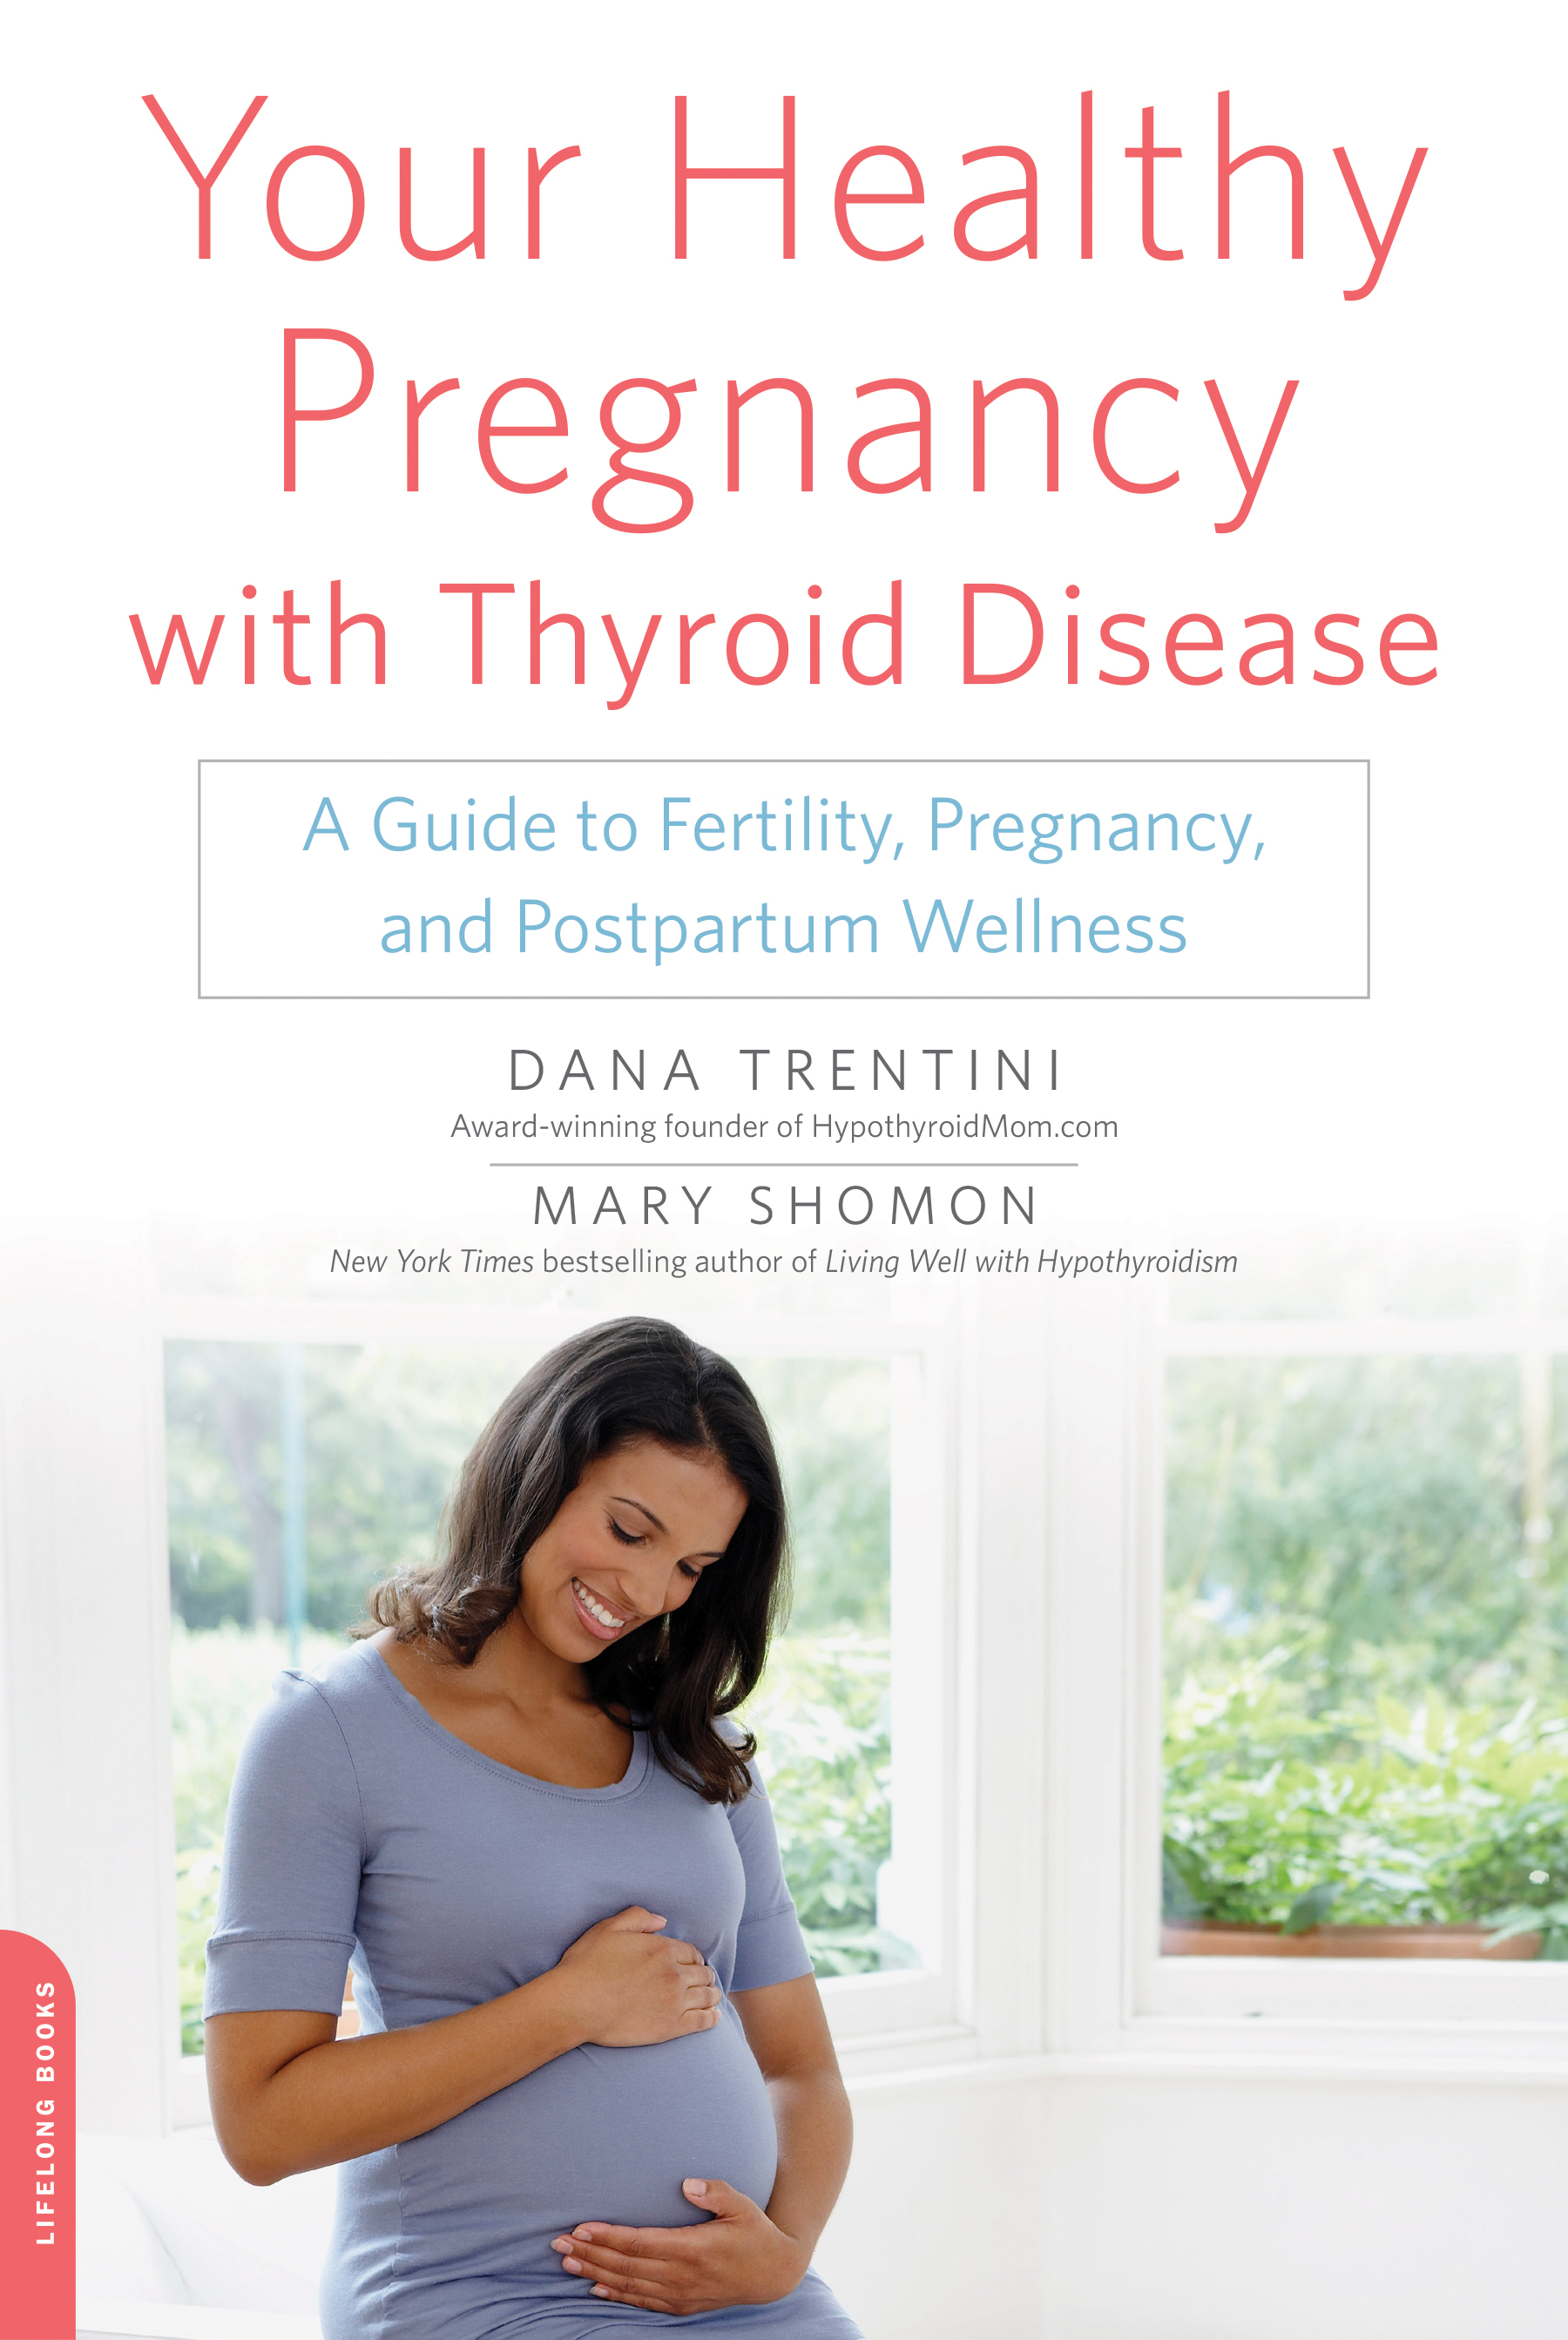 "Your Healthy Pregnancy with Thyroid Disease" cover